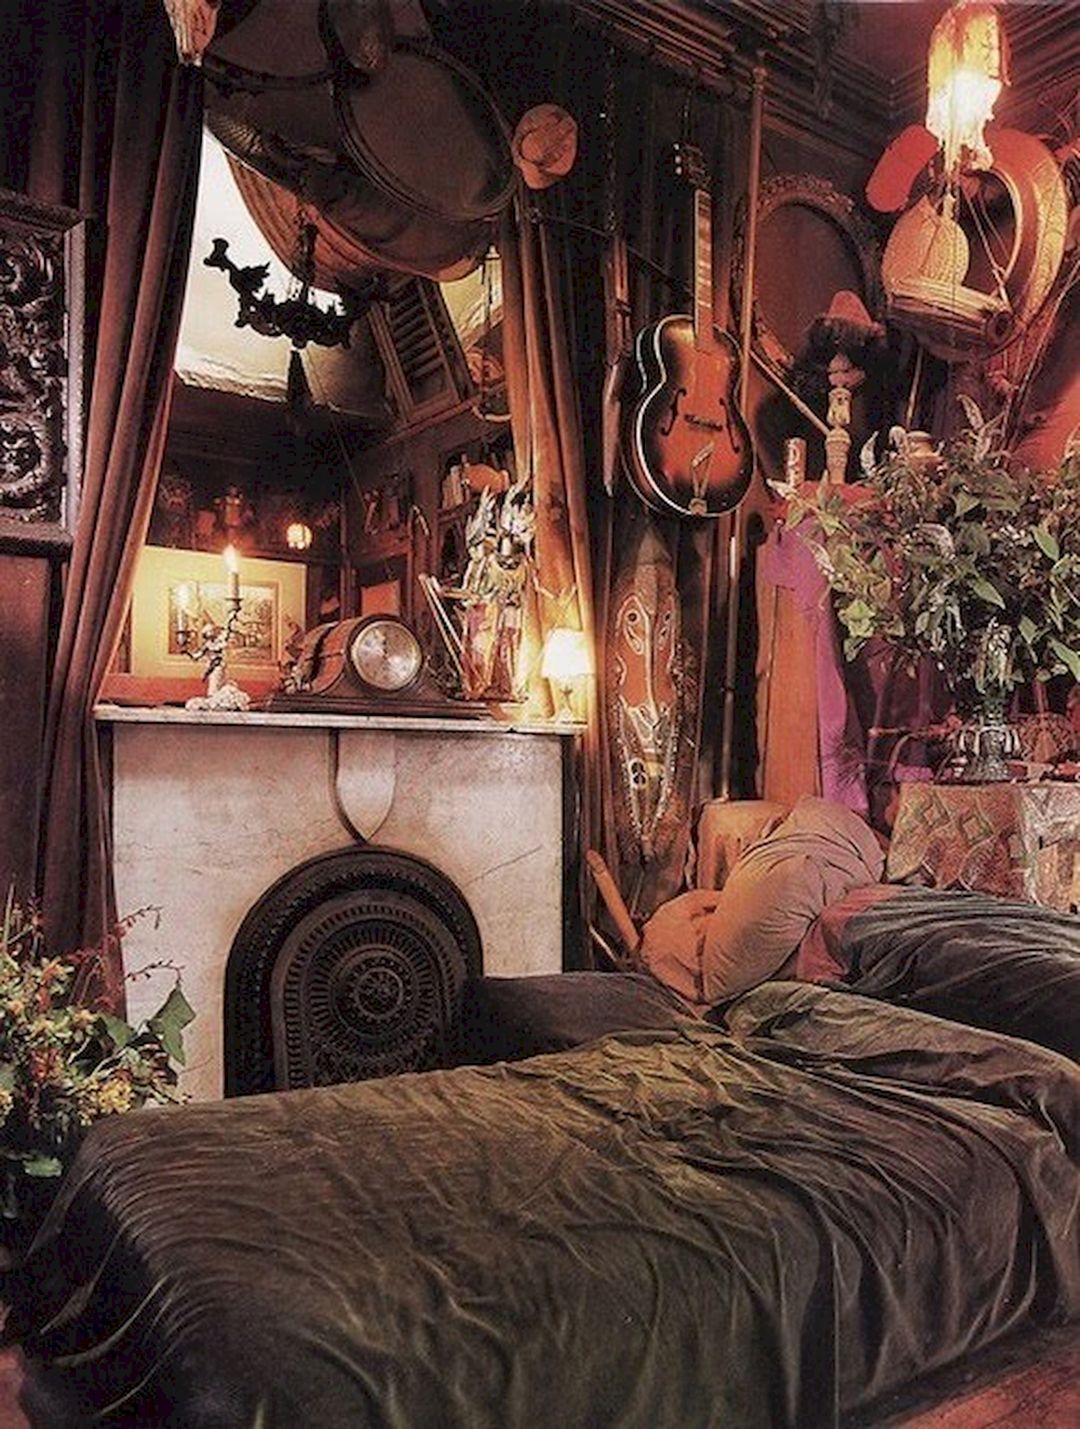 25 Inspiring Gothic Bedroom Idea To Try For The Next Halloween Find & download free graphic resources for boho. 25 inspiring gothic bedroom idea to try